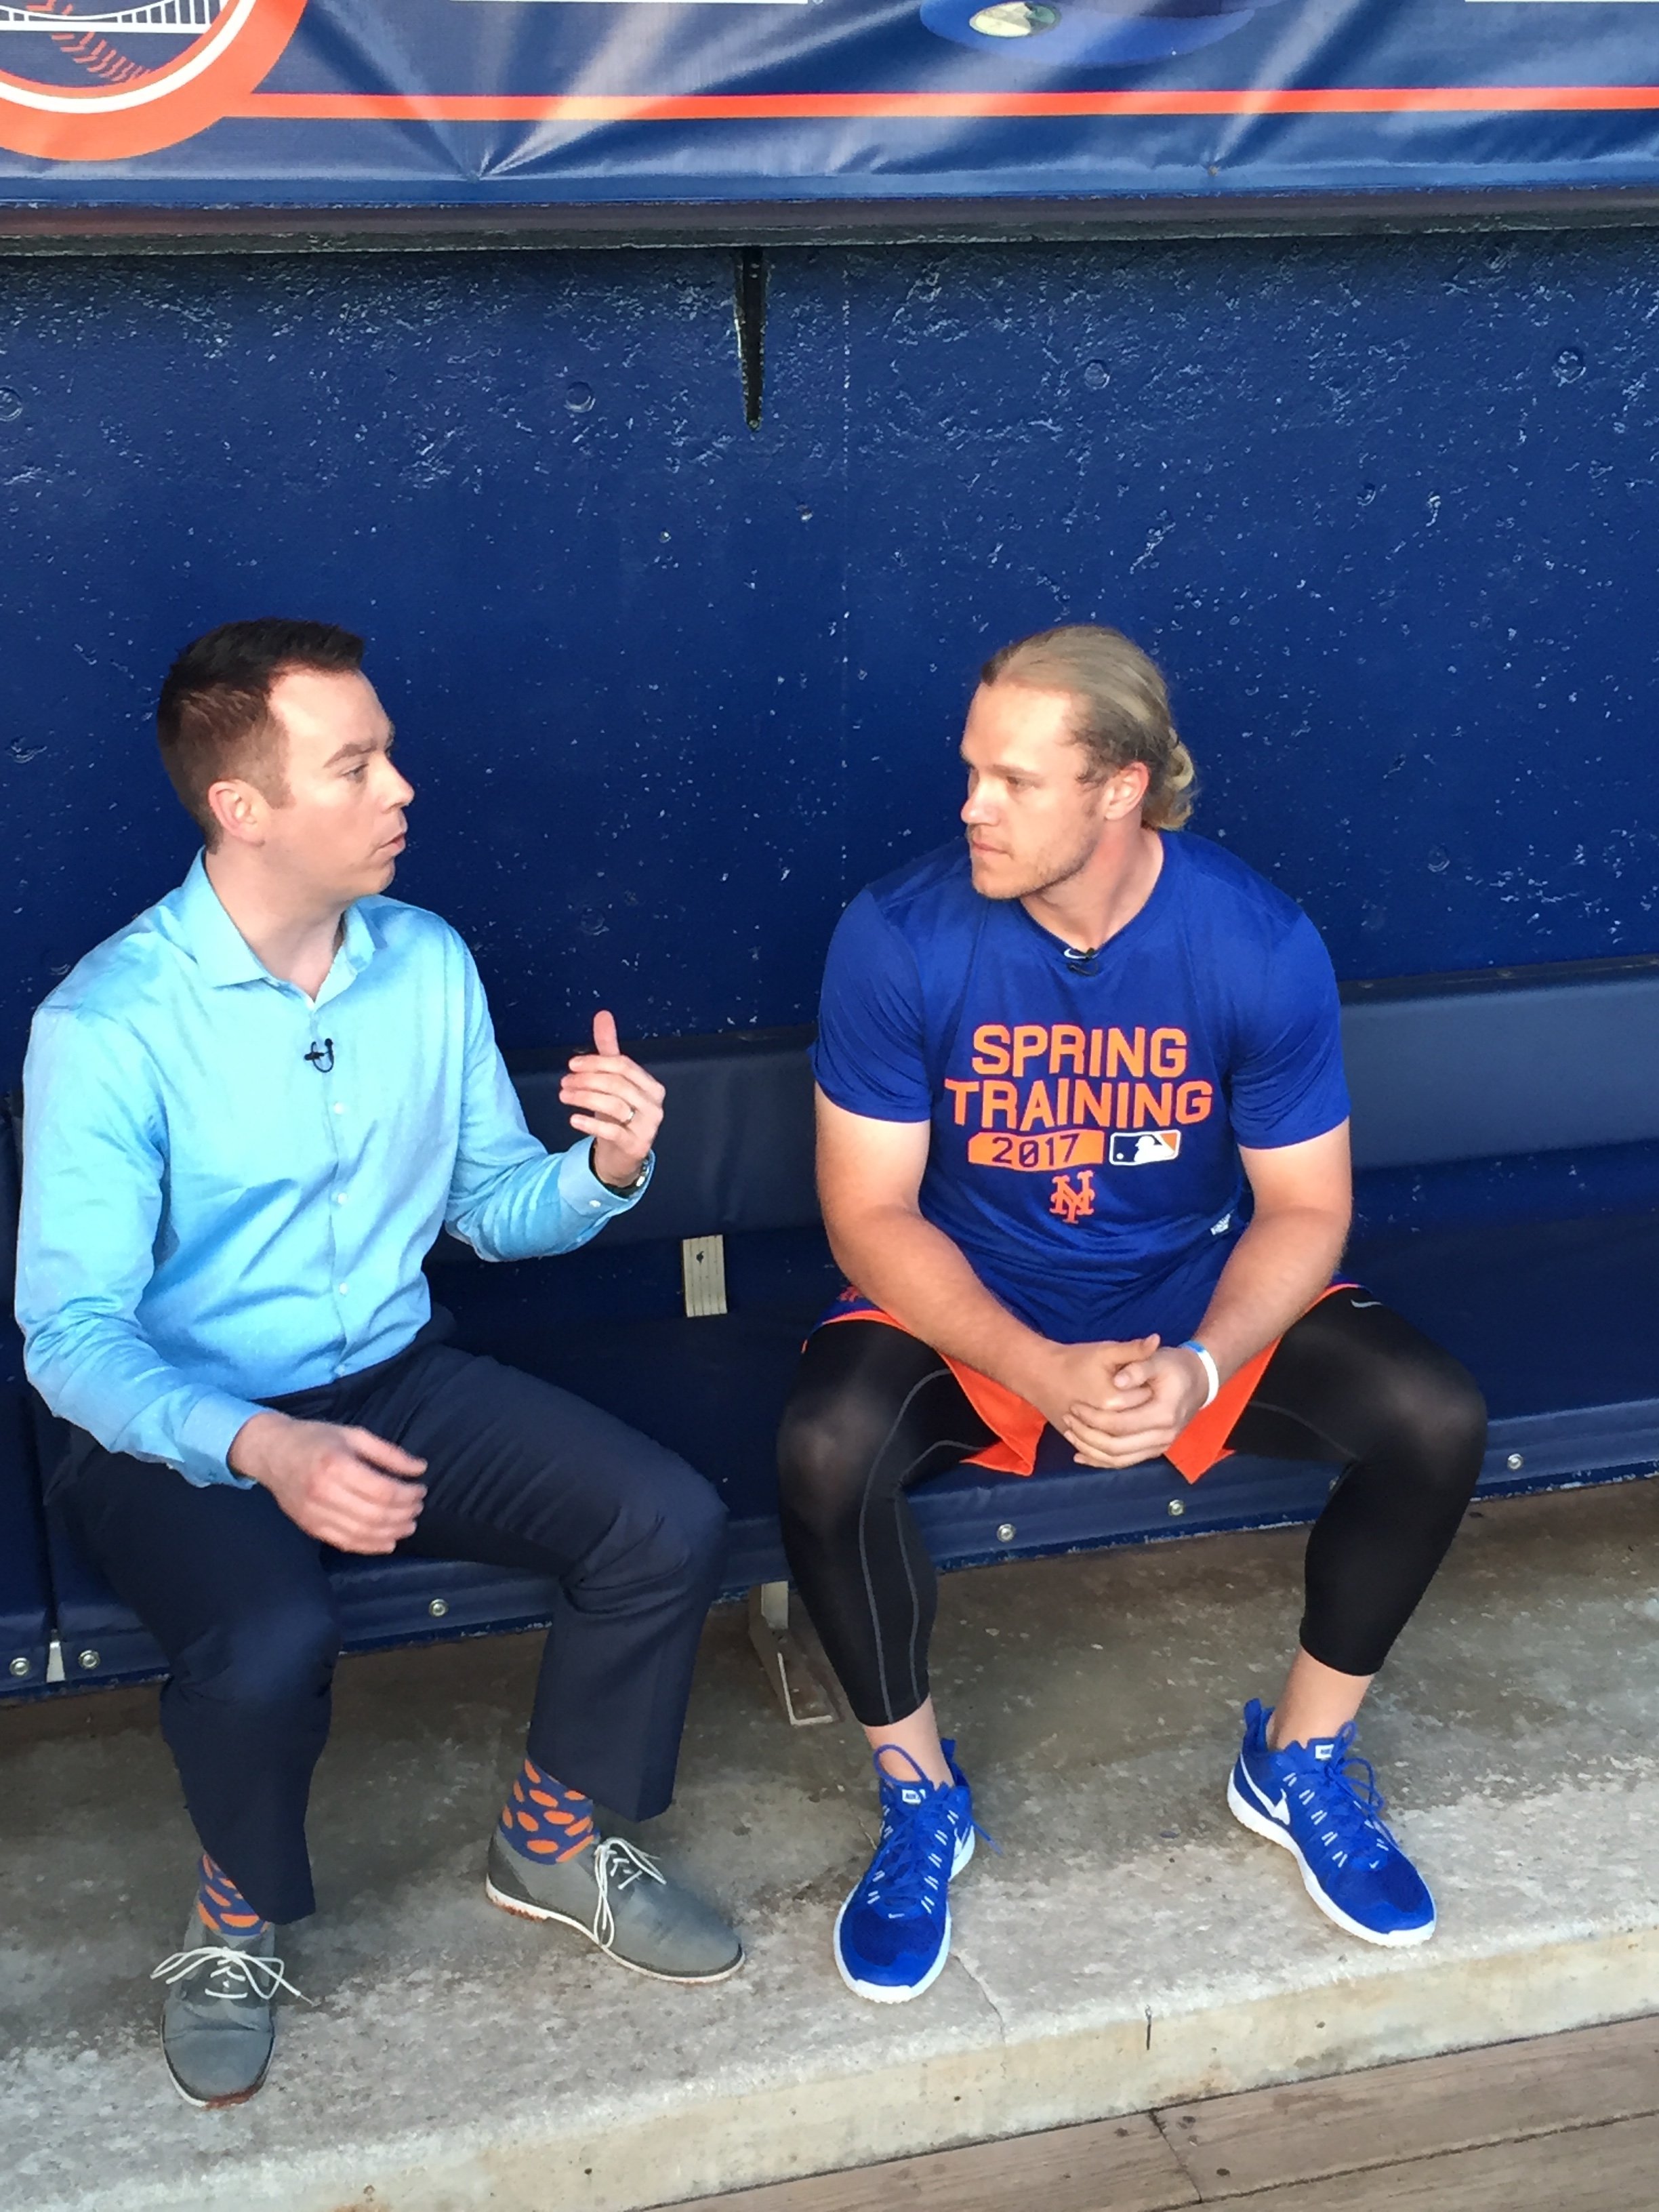 Randy Scott with Noah Syndergaard at the Met's training facility in Florida. (Shawn Fitzgerald/ESPN)